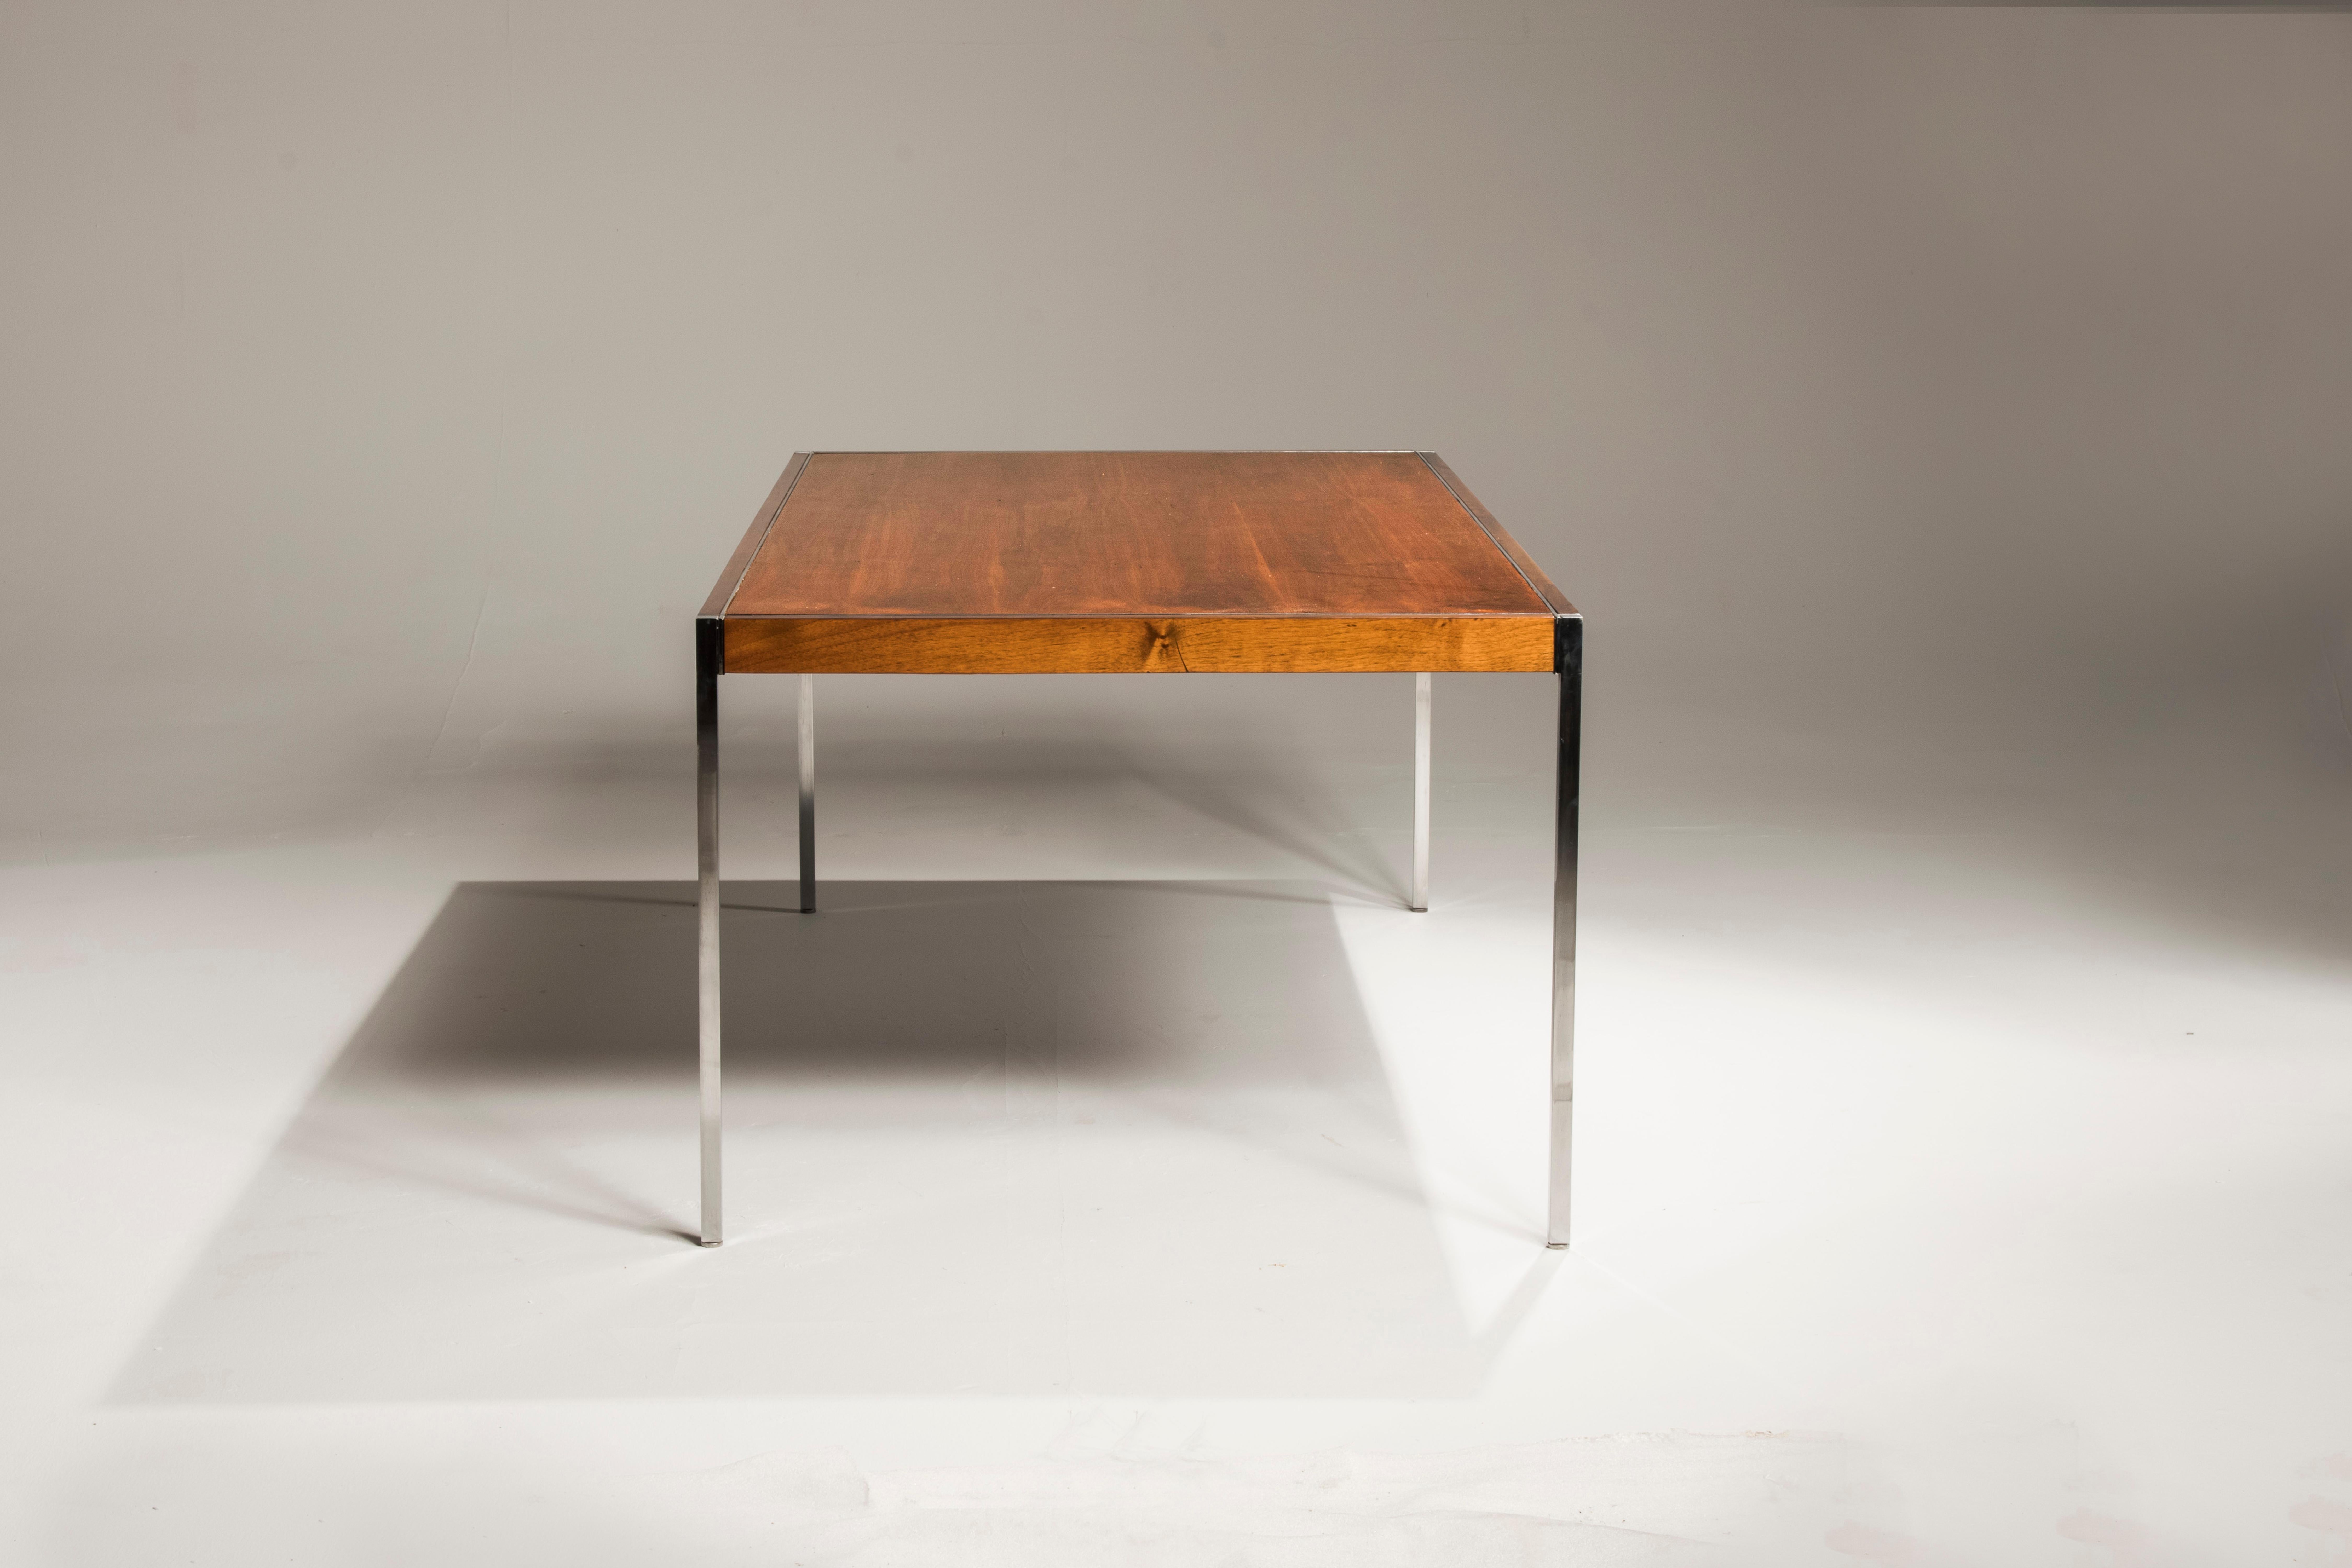 Steel Knoll Walnut Wood Table Desks from Florence Collection 